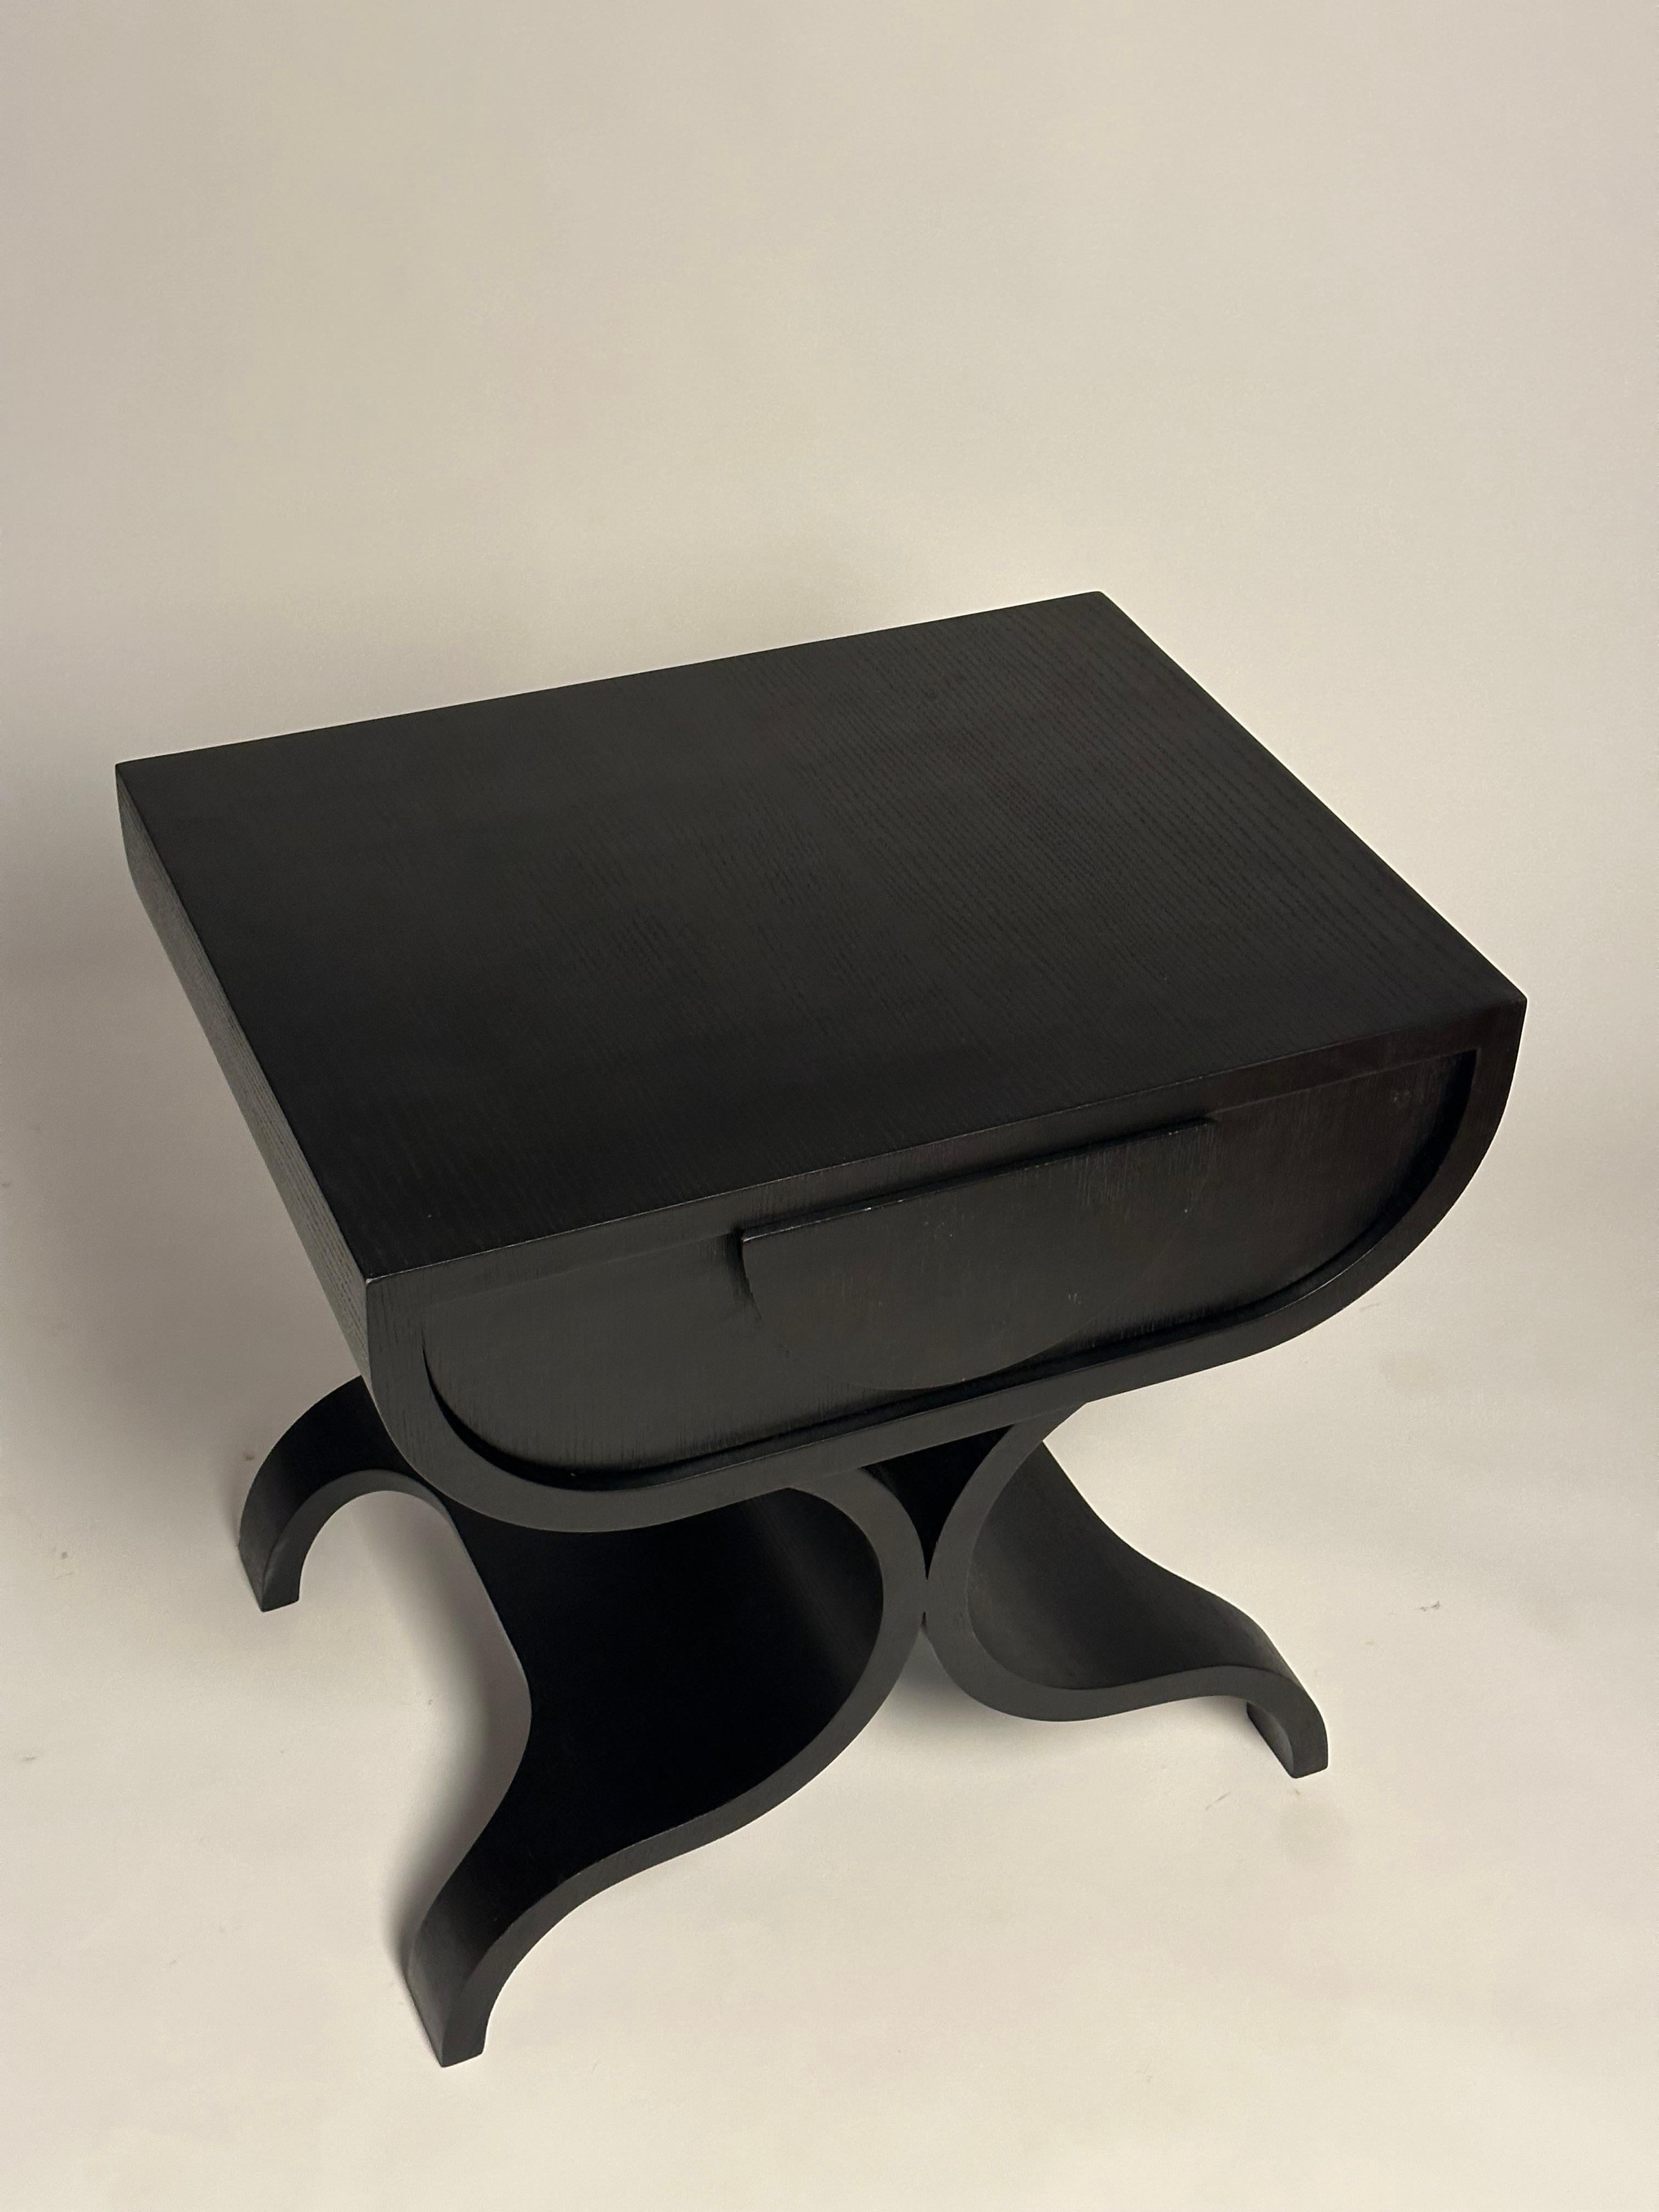 The “BLACK COBRA” is the sister of the “COBRA” nightstand. This is a new line of furniture that is inspired by the undulating movement of a cobra, a snake that was worshipped in ancient Egypt as a symbol of royalty. Designed by Hassan Abouseda for